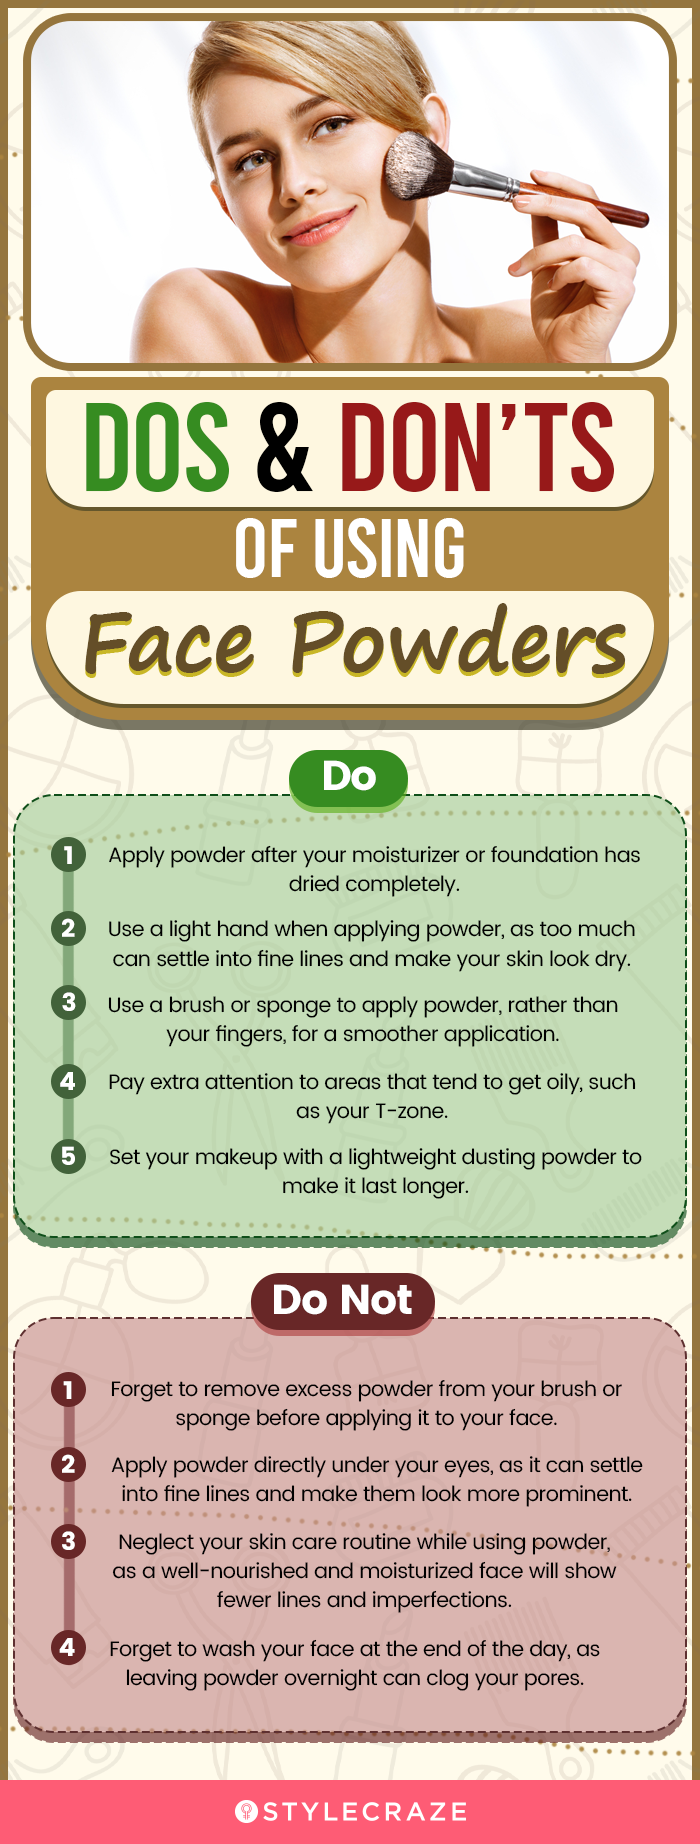 Dos & Don’ts Of Using Face Powders (infographic)